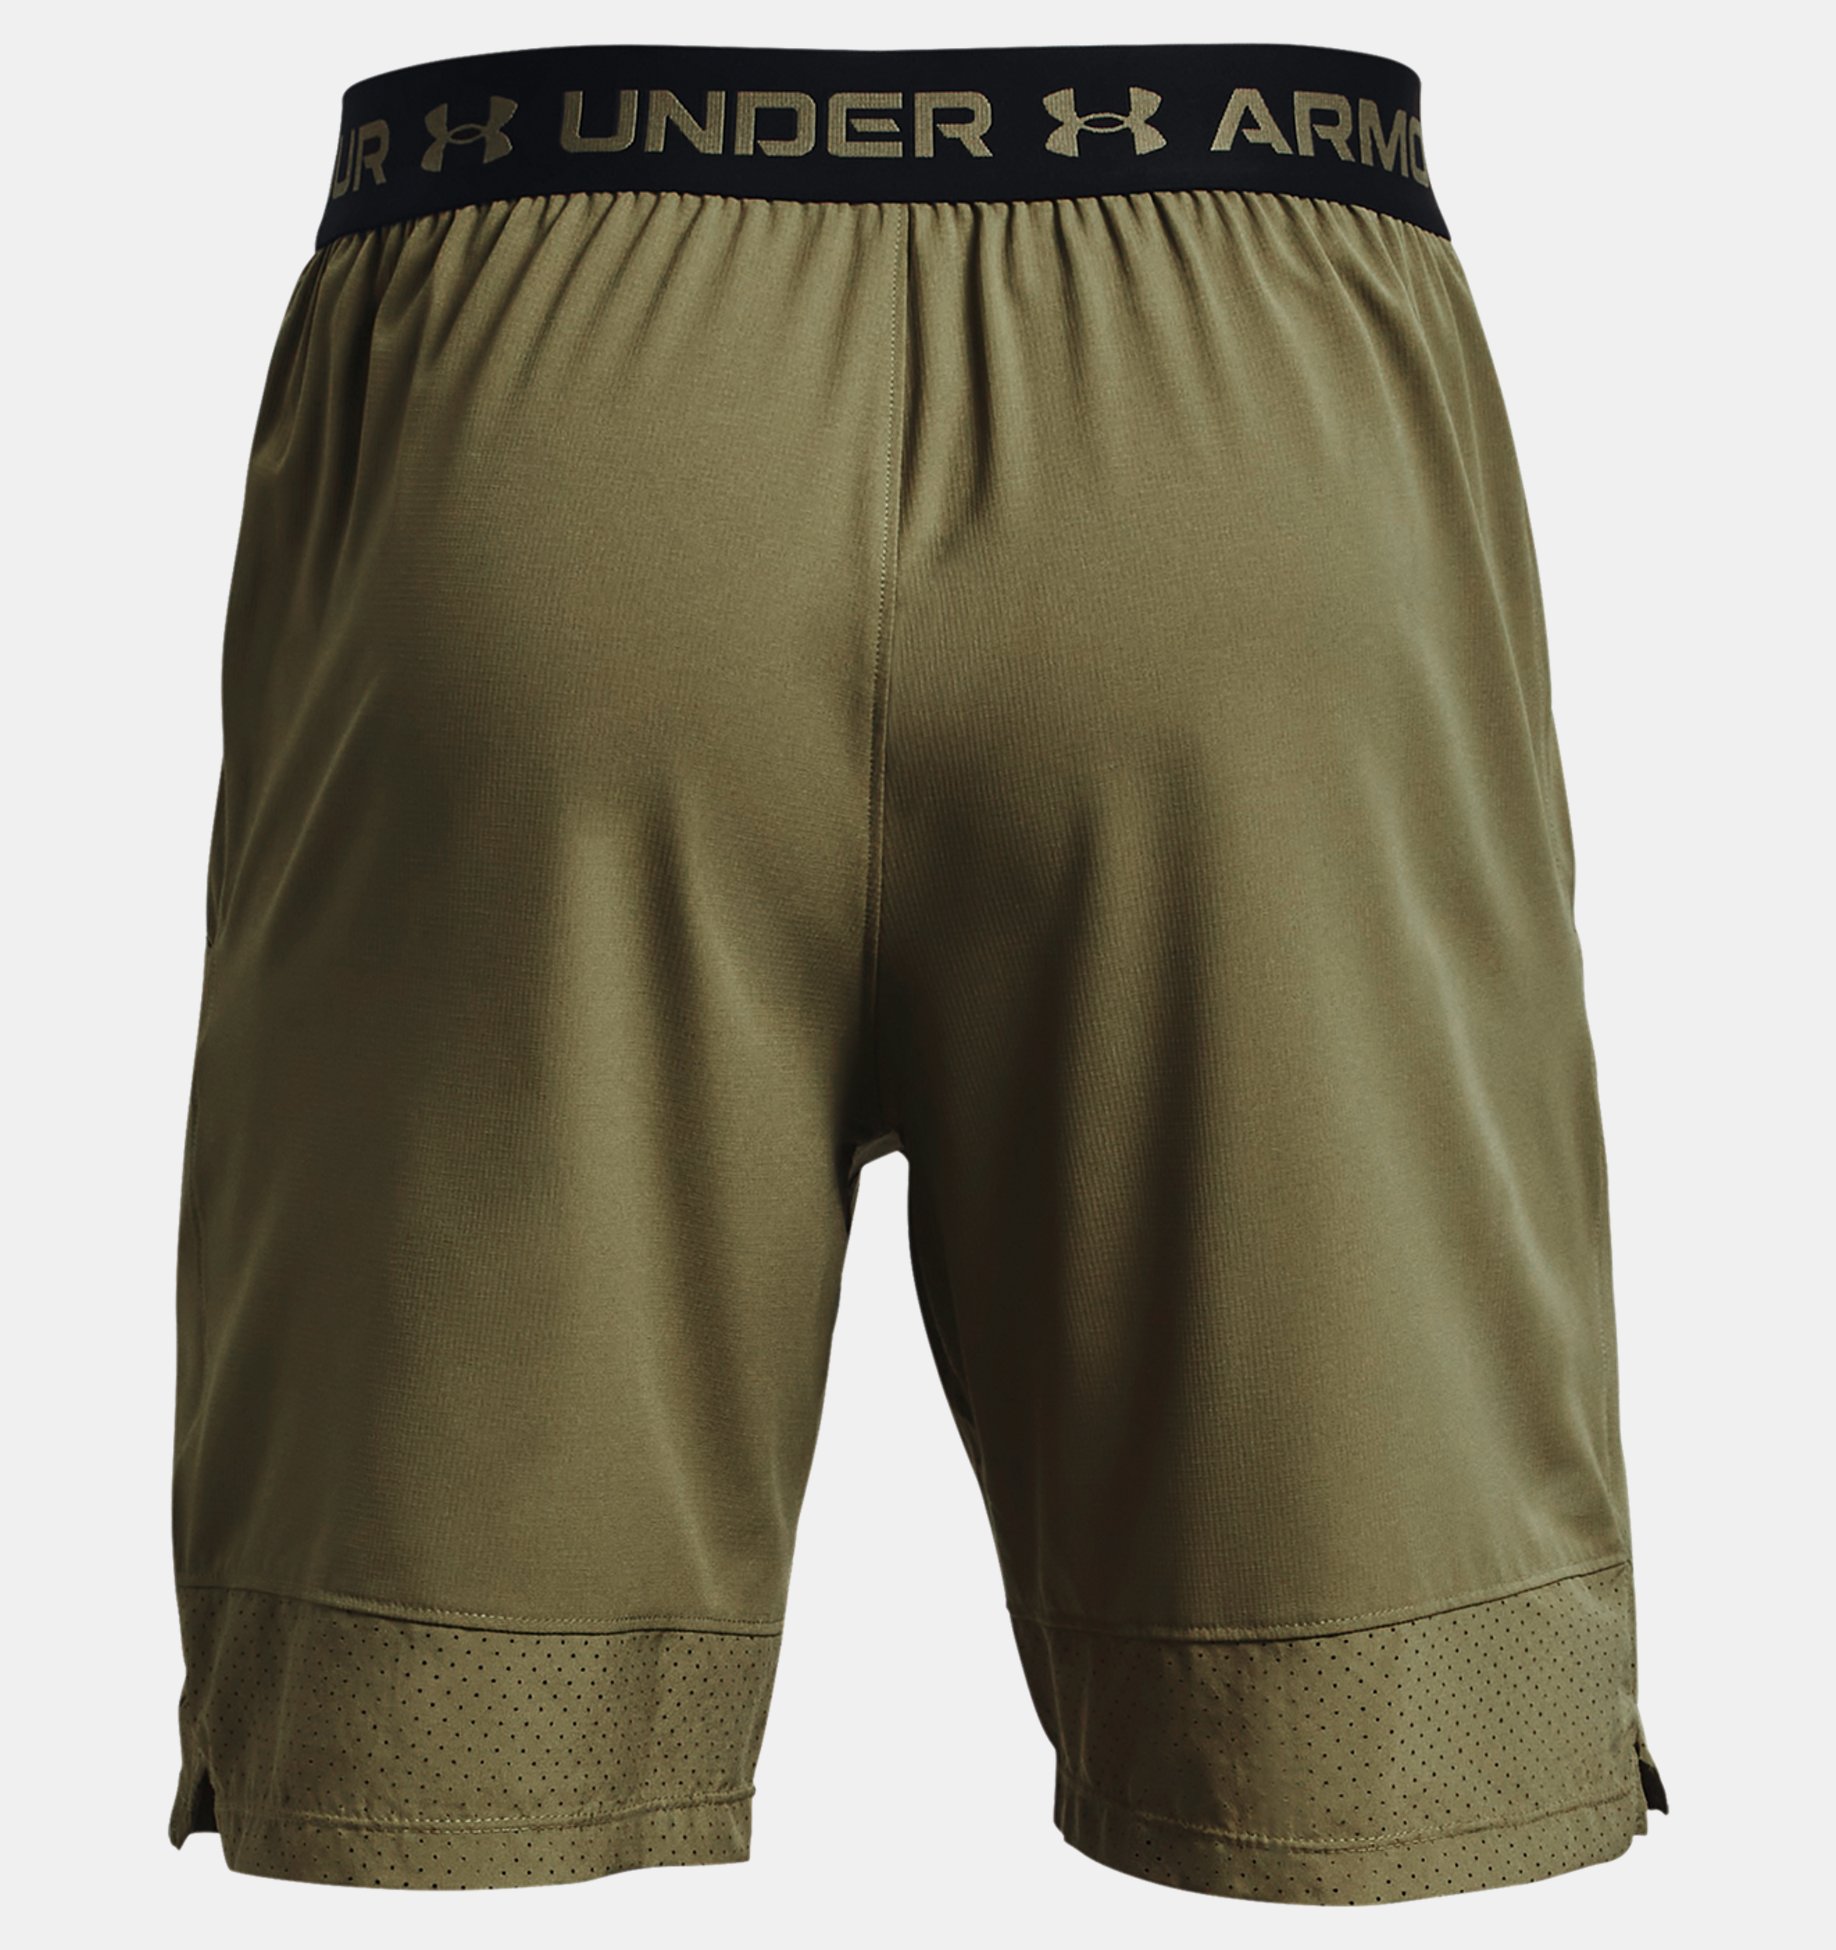 New Under Armour Men's Vanish Woven Shorts Size Small Green 